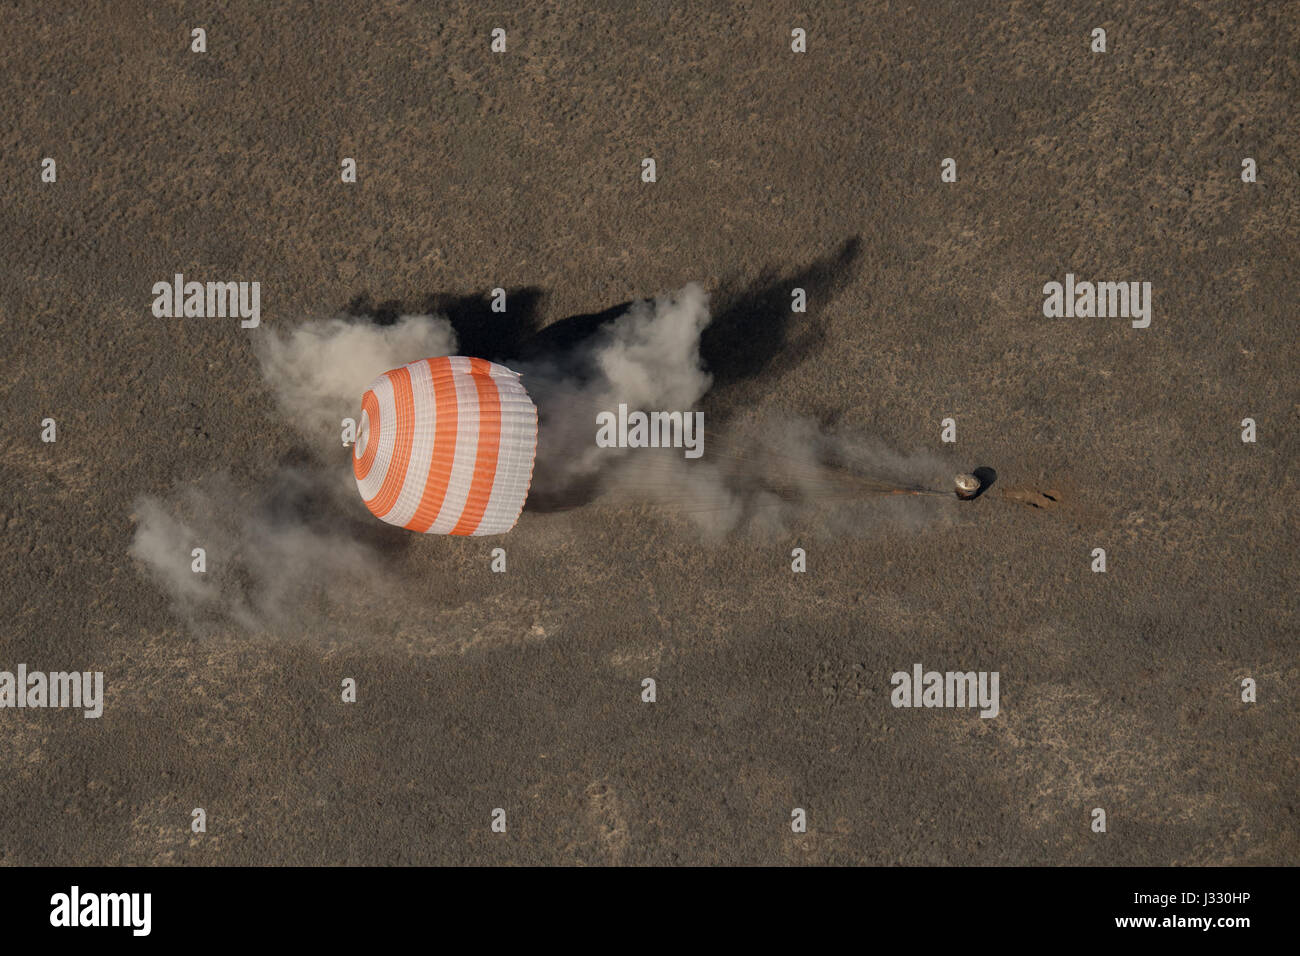 The Soyuz MS-02 spacecraft is seen as it lands with Expedition 50 Commander Shane Kimbrough of NASA and Flight Engineers Sergey Ryzhikov and Andrey Borisenko of Roscosmos near the town of Zhezkazgan, Kazakhstan on Monday, April 10, 2017 (Kazakh time). Kimbrough, Ryzhikov, and Borisenko are returning after 173 days in space where they served as members of the Expedition 49 and 50 crews onboard the International Space Station. Photo Credit: (NASA/Bill Ingalls) Stock Photo